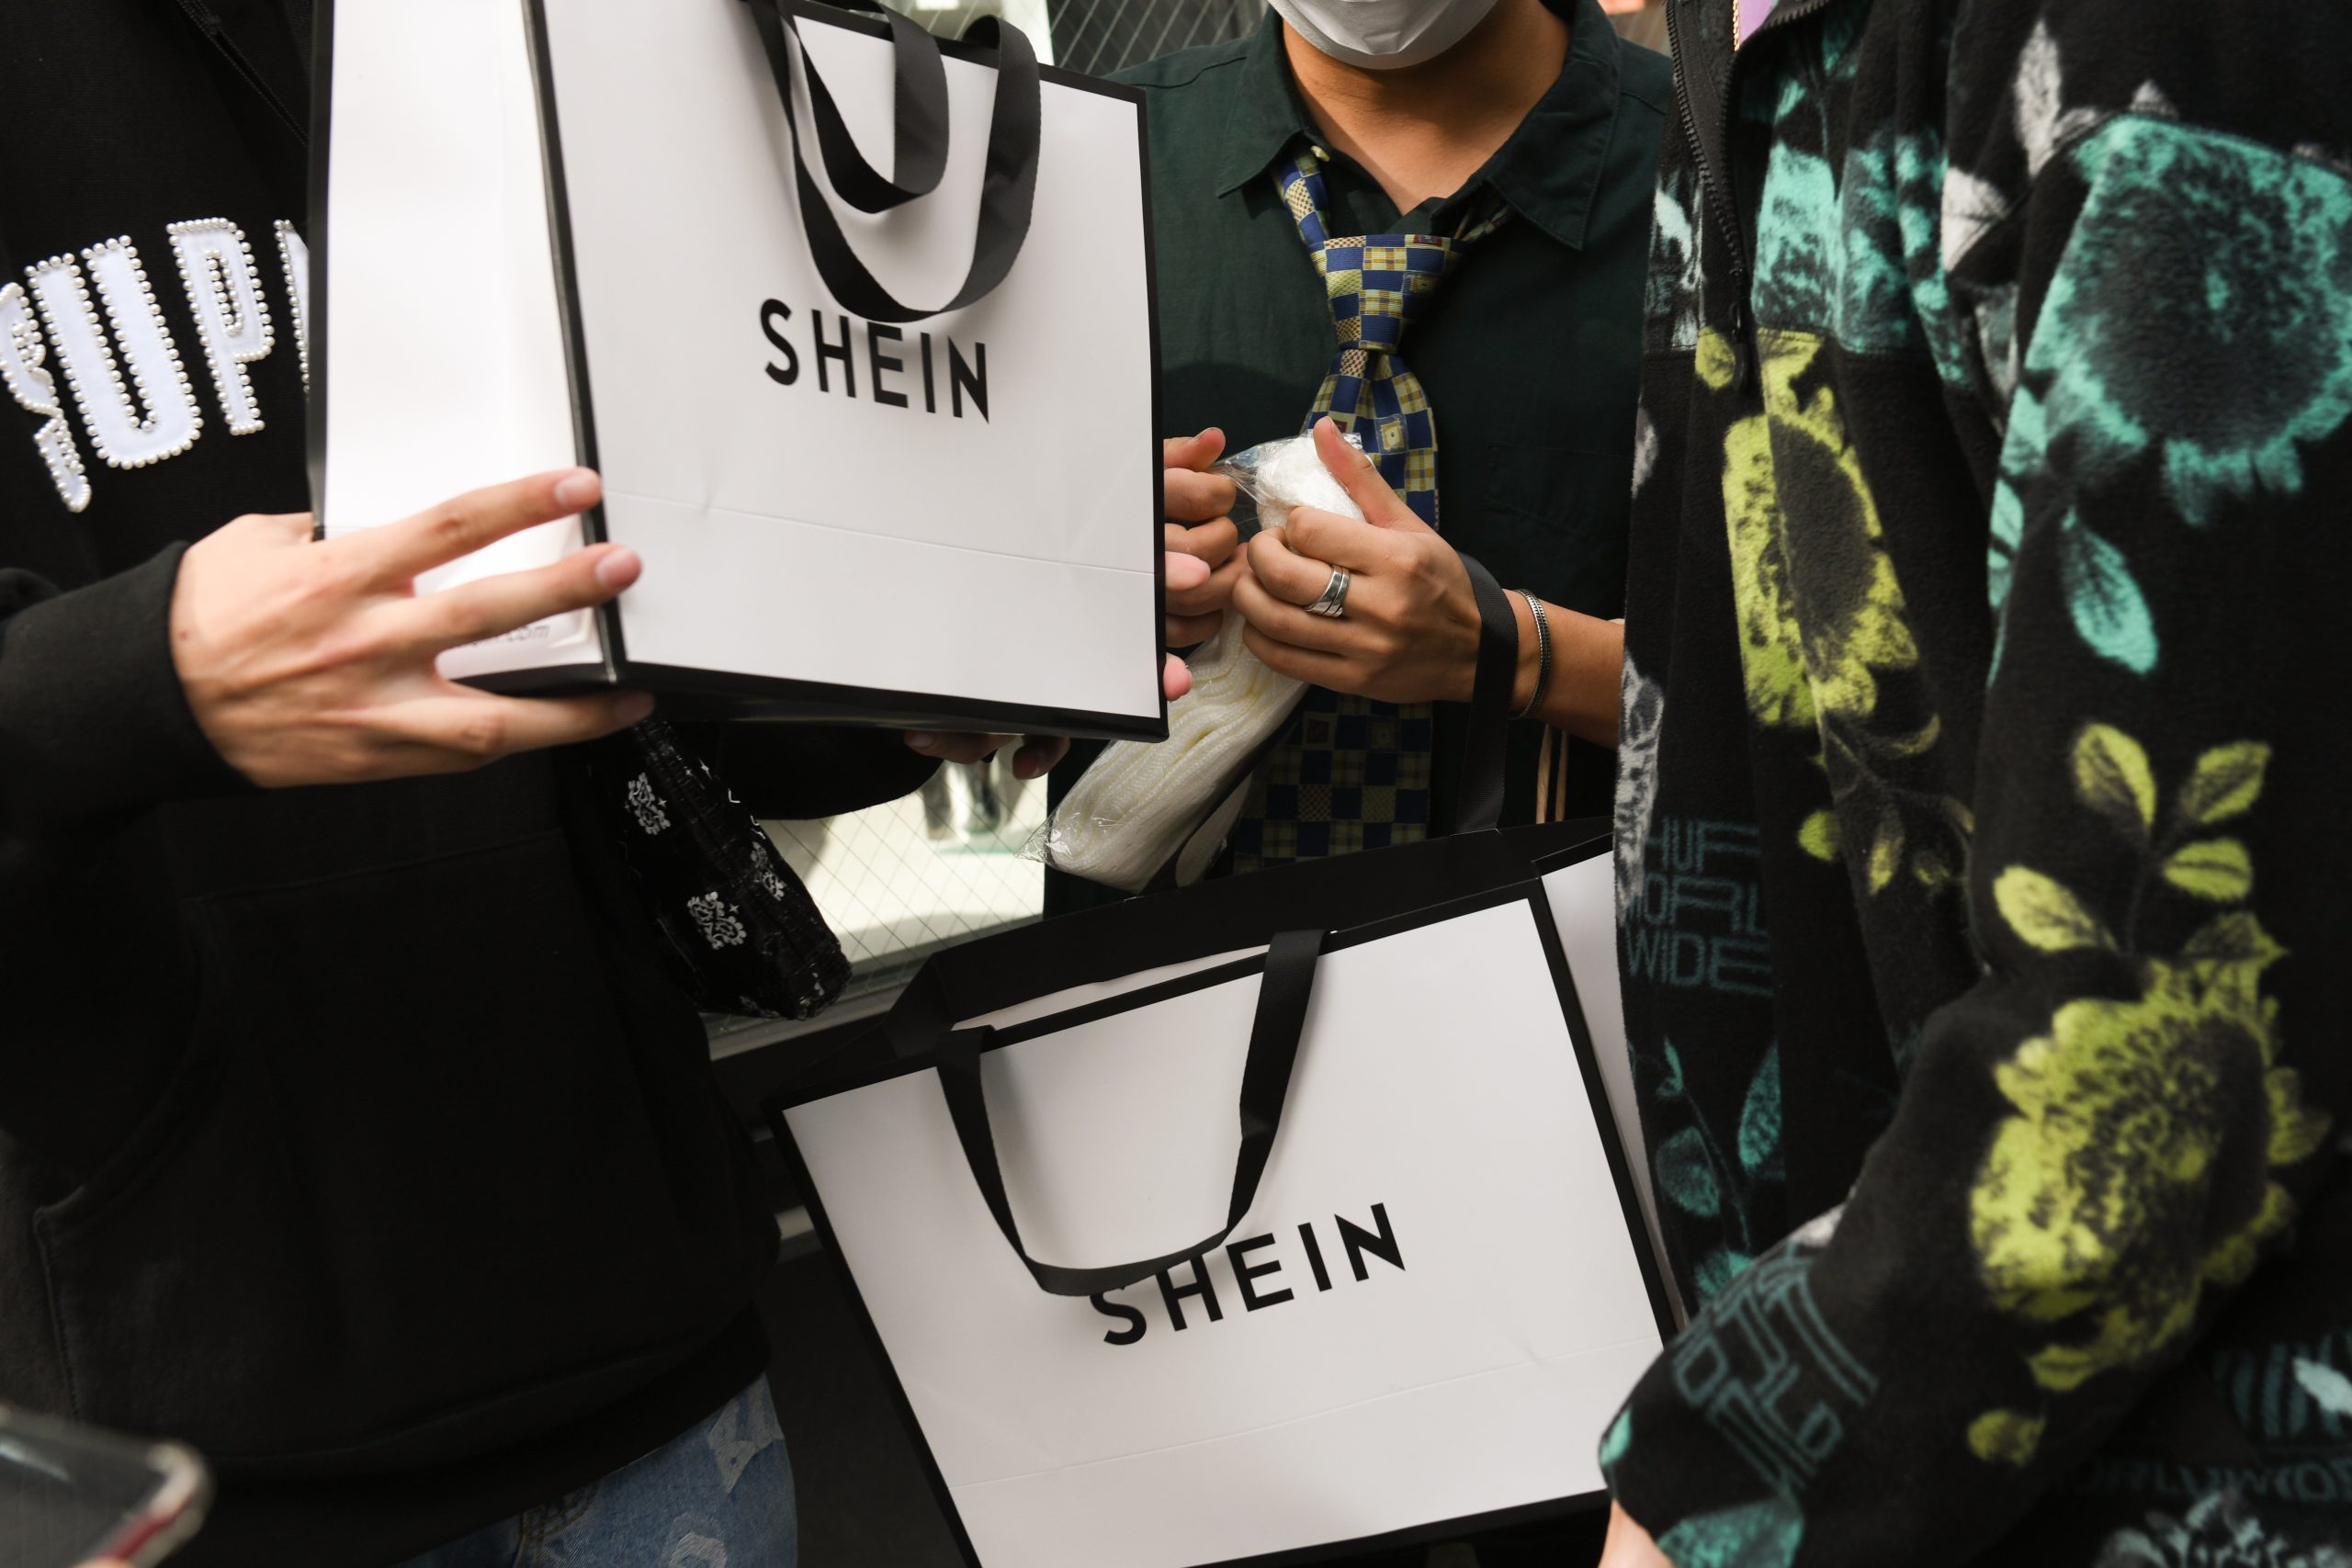 Shein is under investigation in South Africa - Rest of World